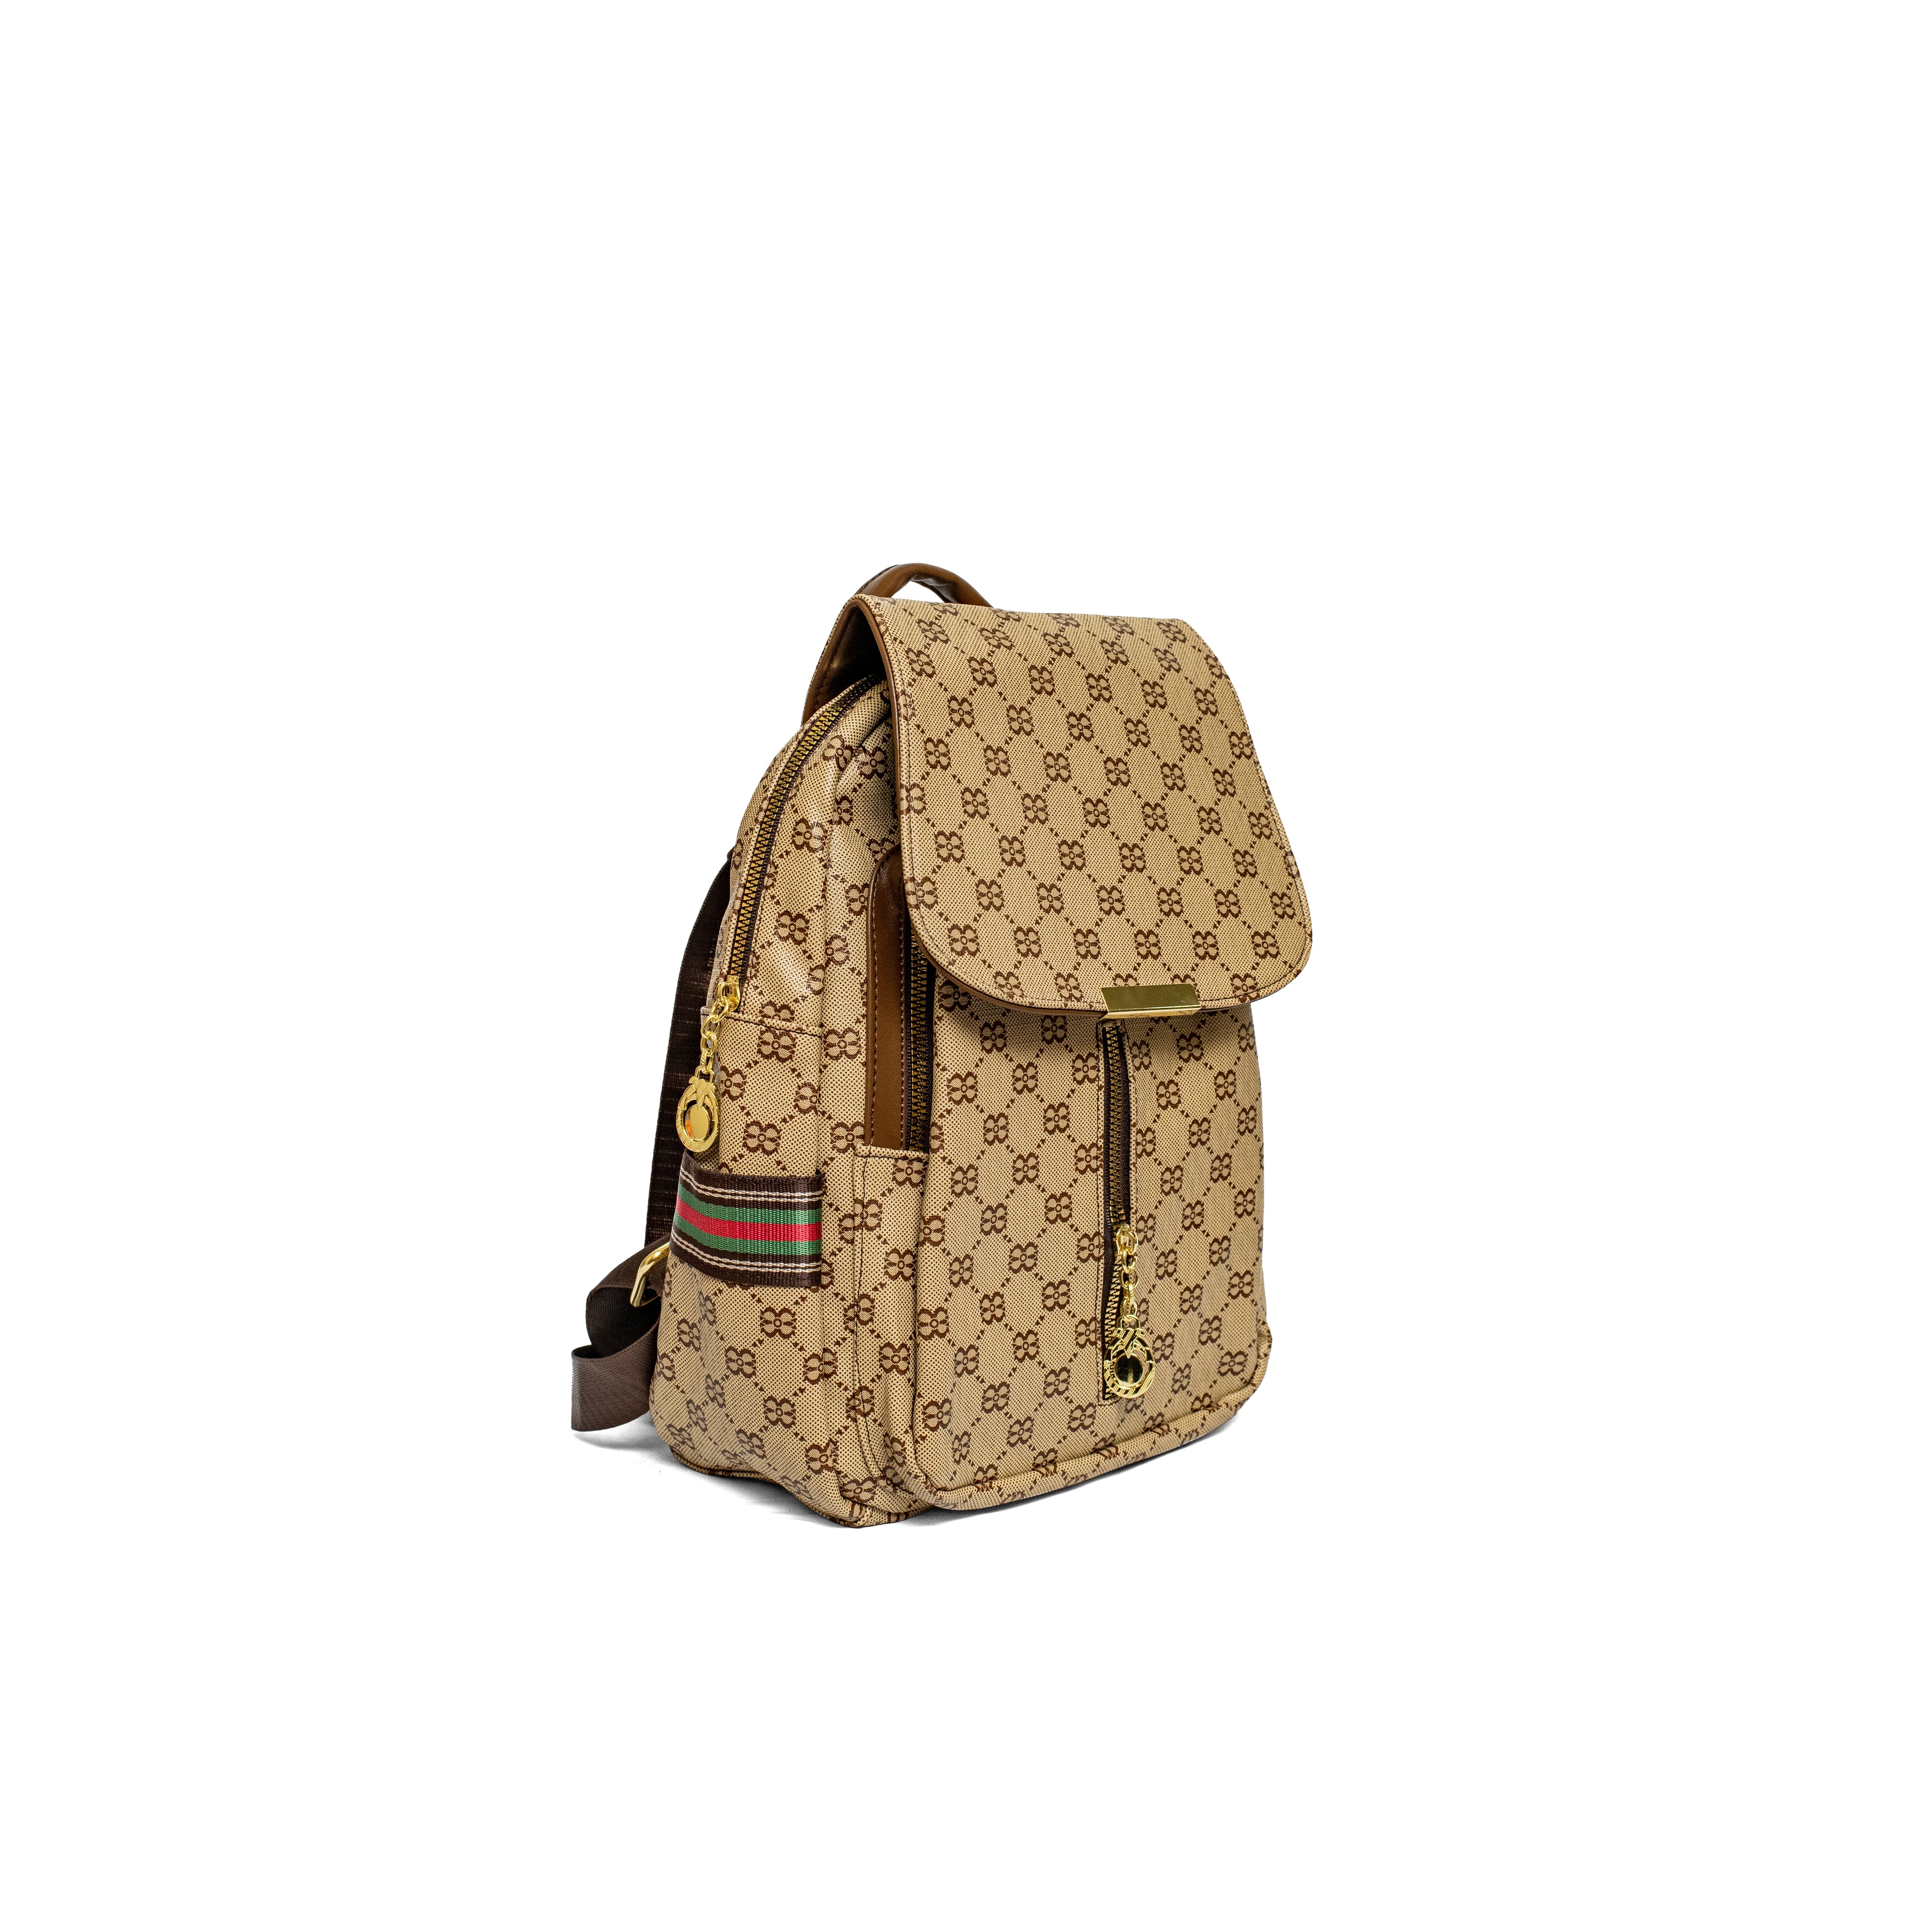 Vuitton Back pack